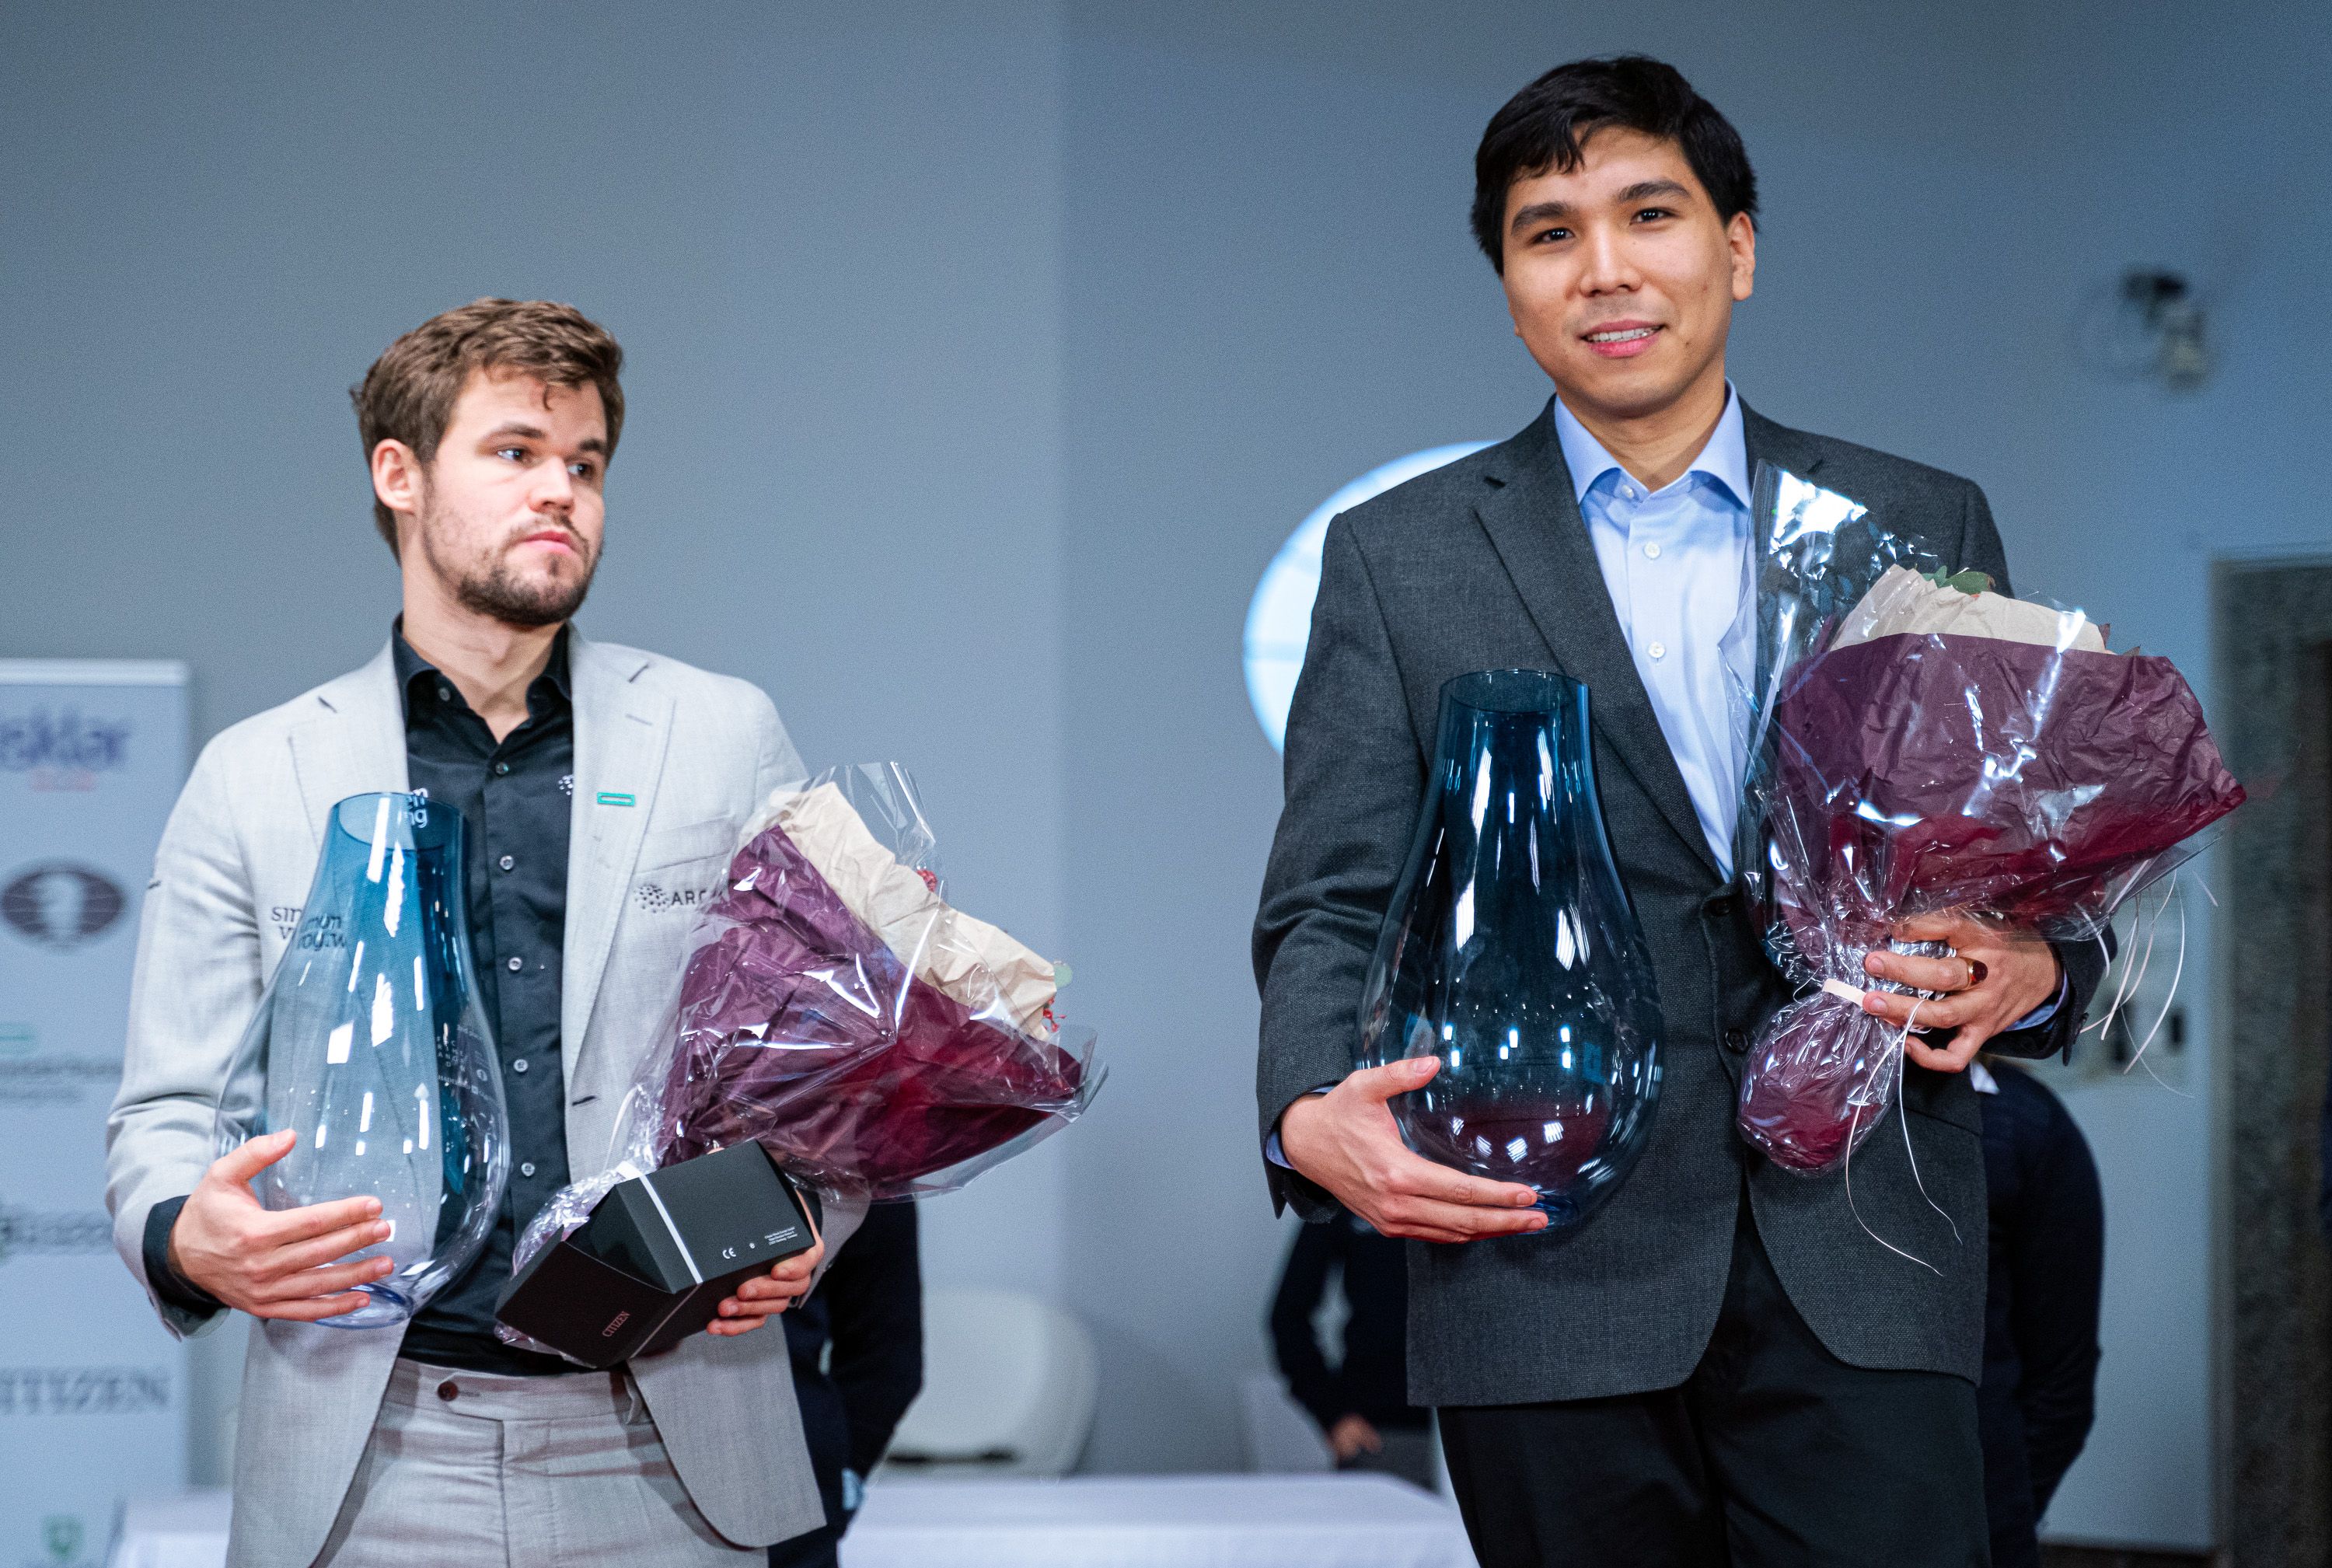 Palau Chess: (853) WHAT DID WE DO TO WESLEY SO